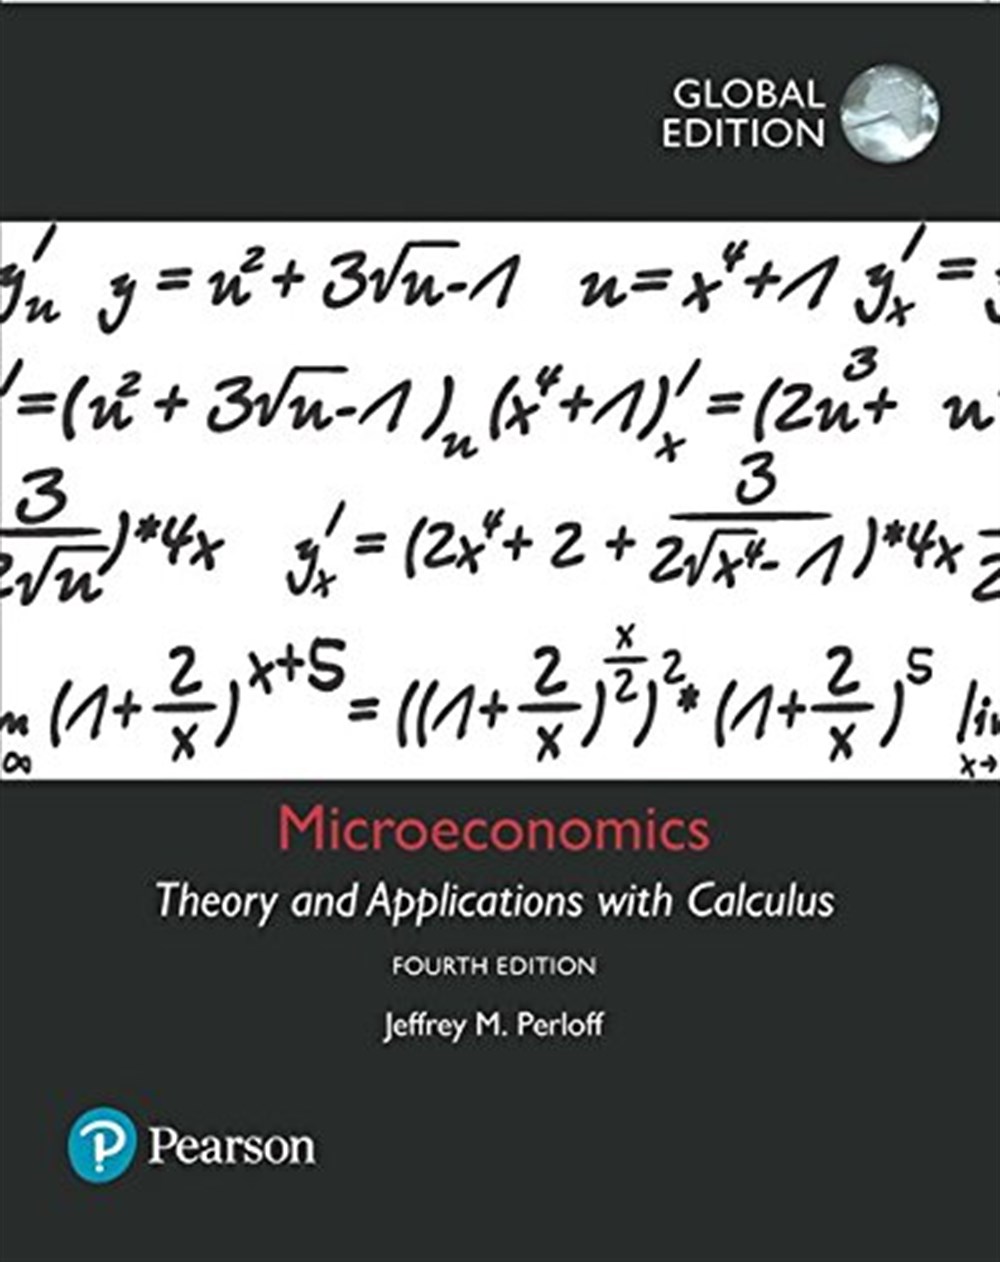 HE-Perloff-Microecon with Calculus GE p4